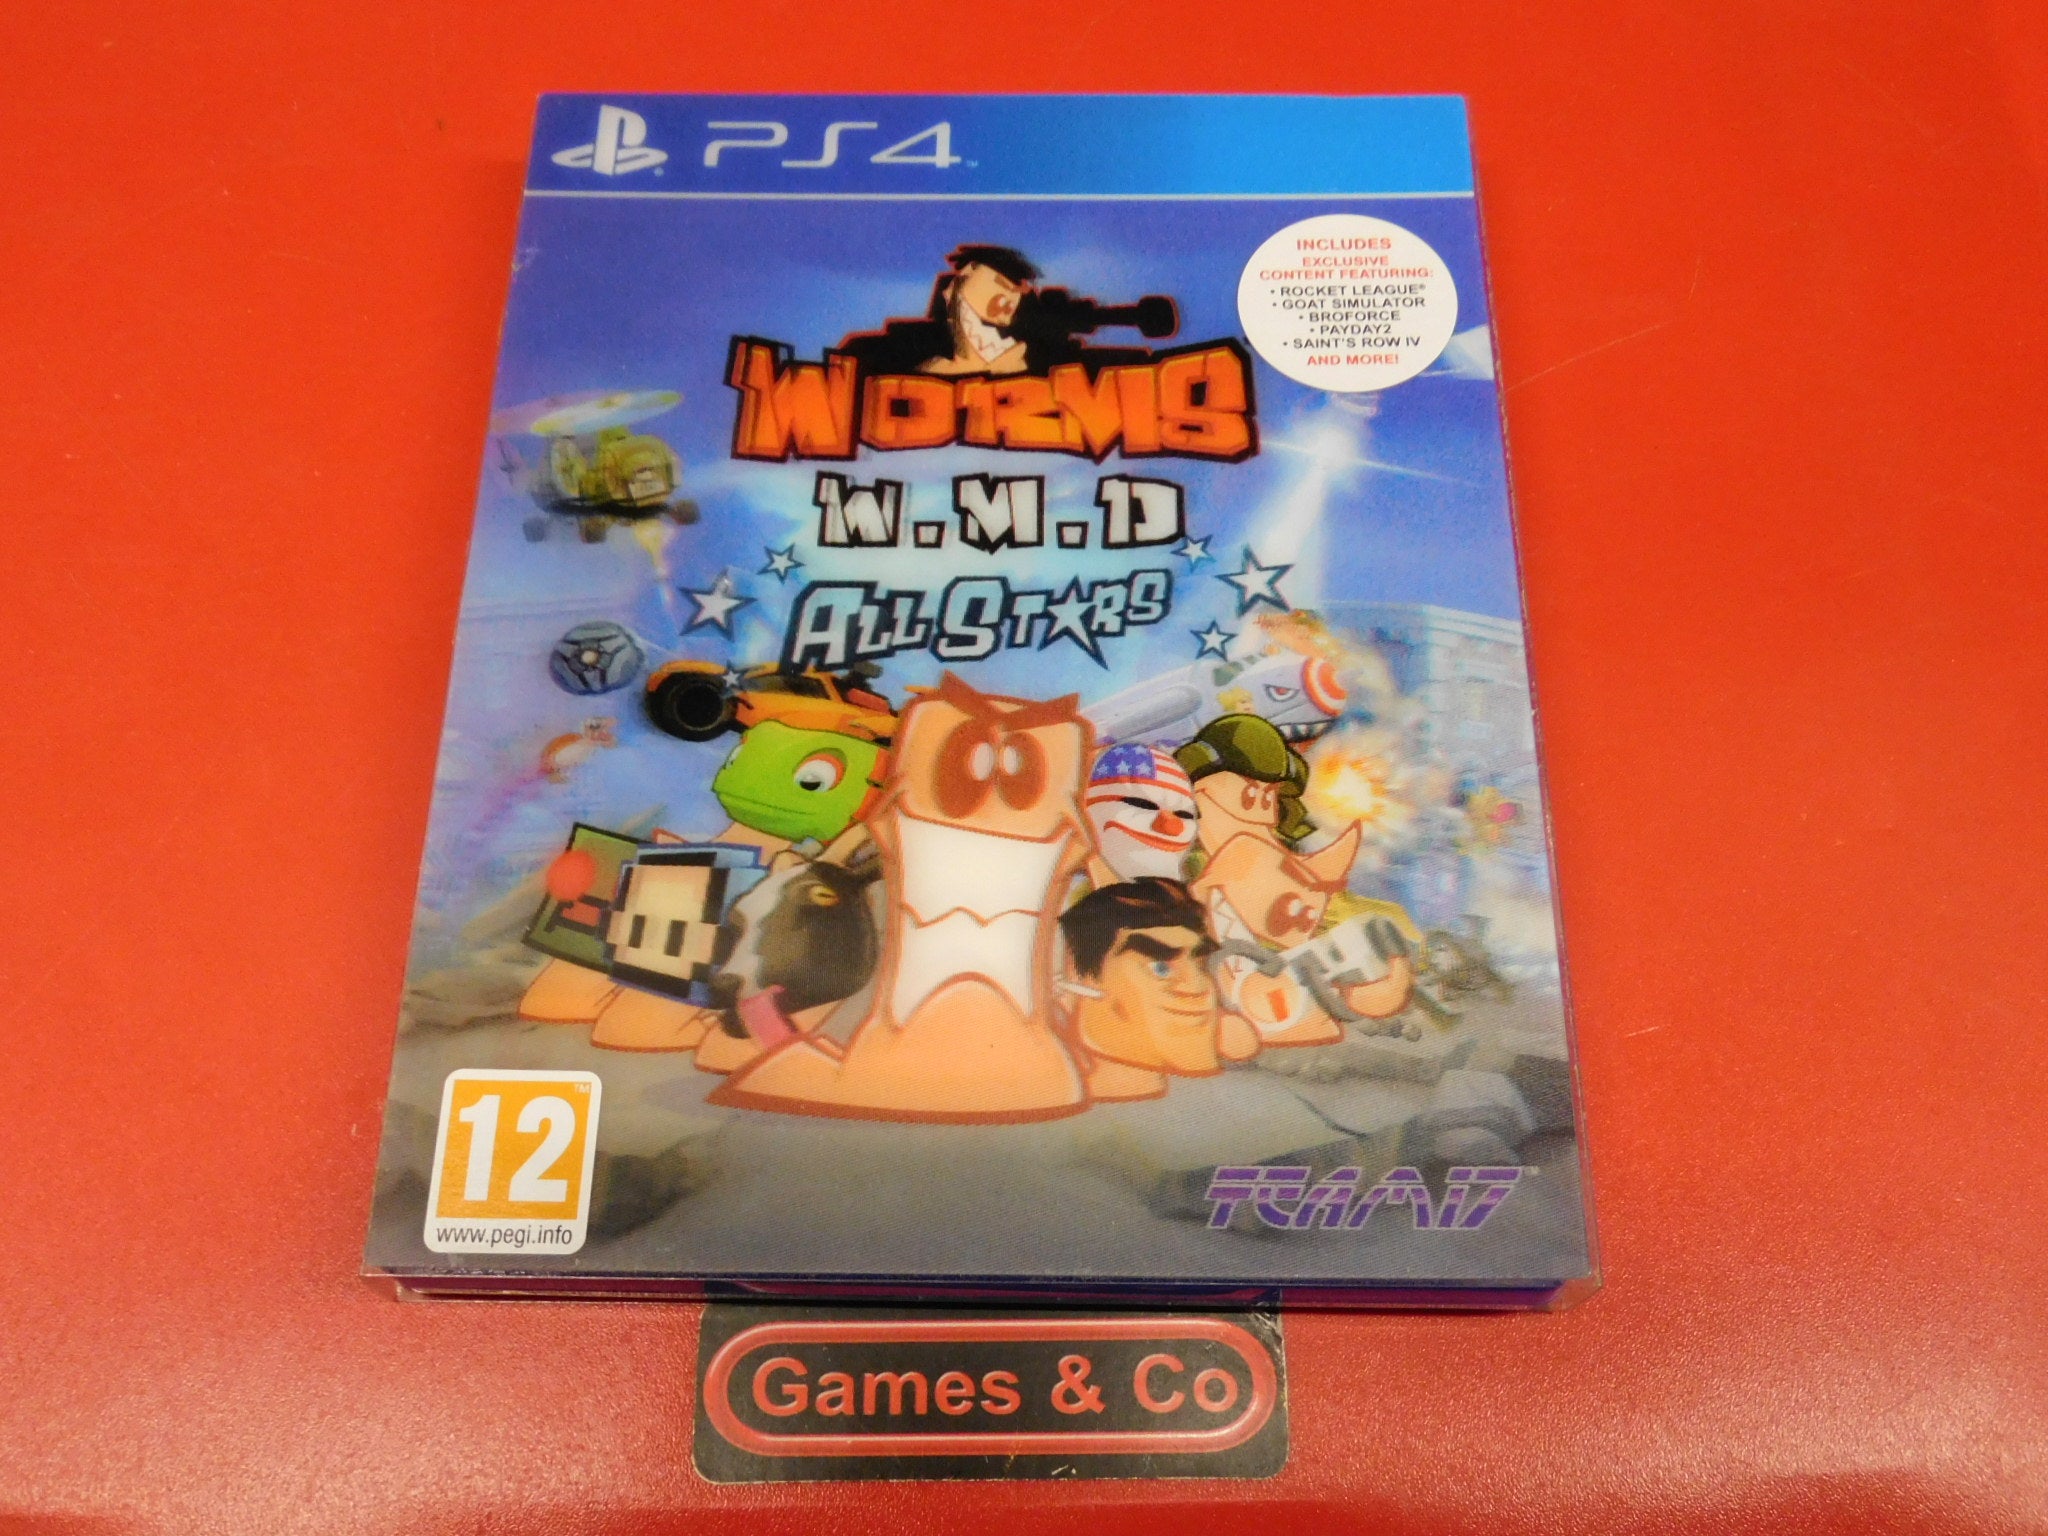 WORMS W.M.D. ALL STARS